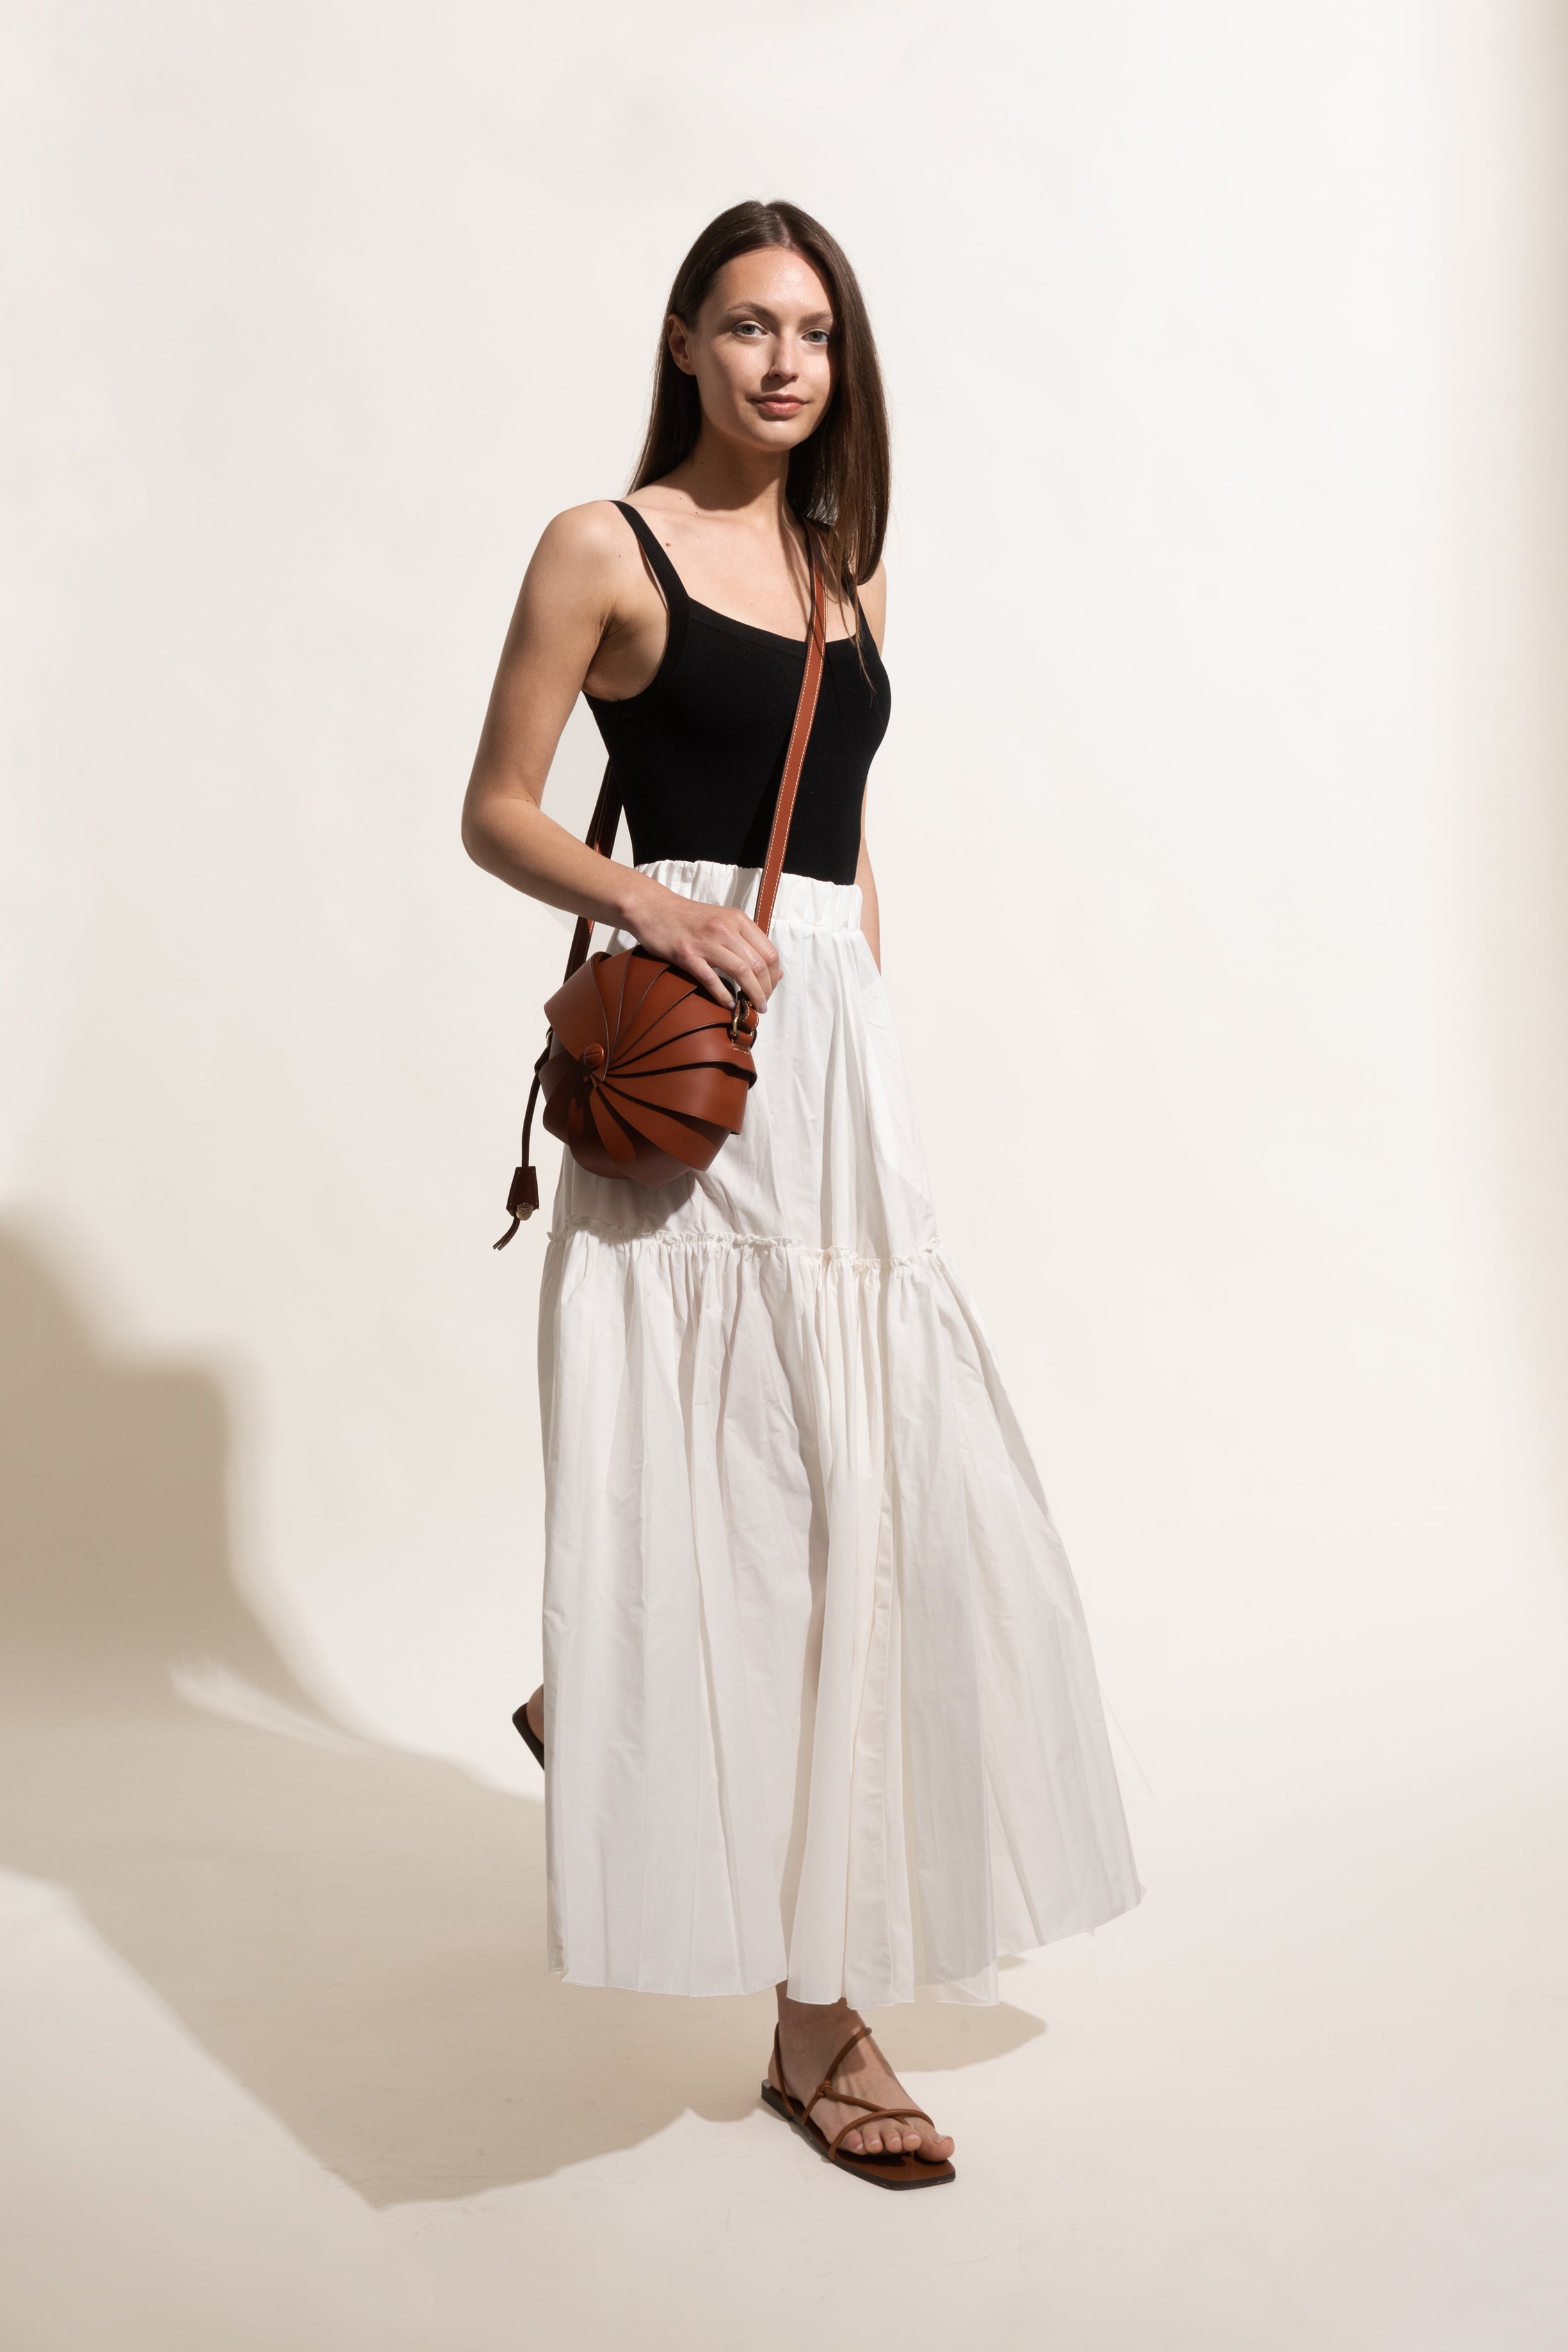 Woman wearing a black tank top, white long skirt, and carrying a brown crossbody bag